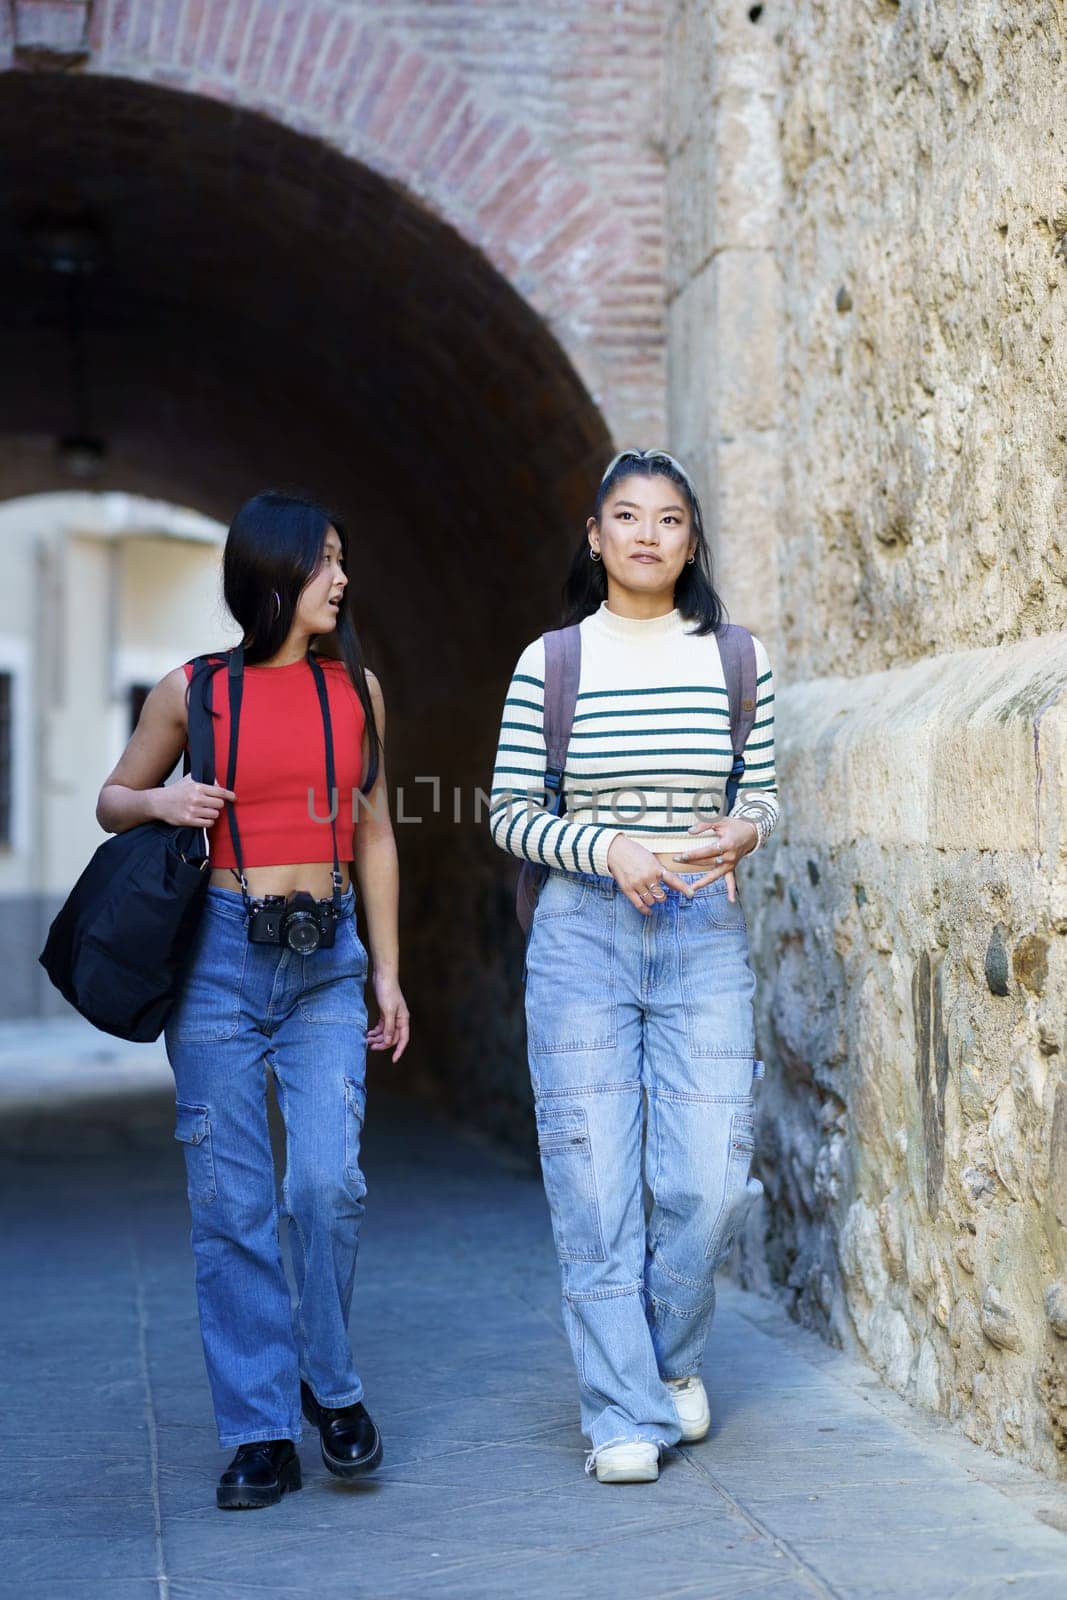 Asian girls friends walking with bags together in street by javiindy